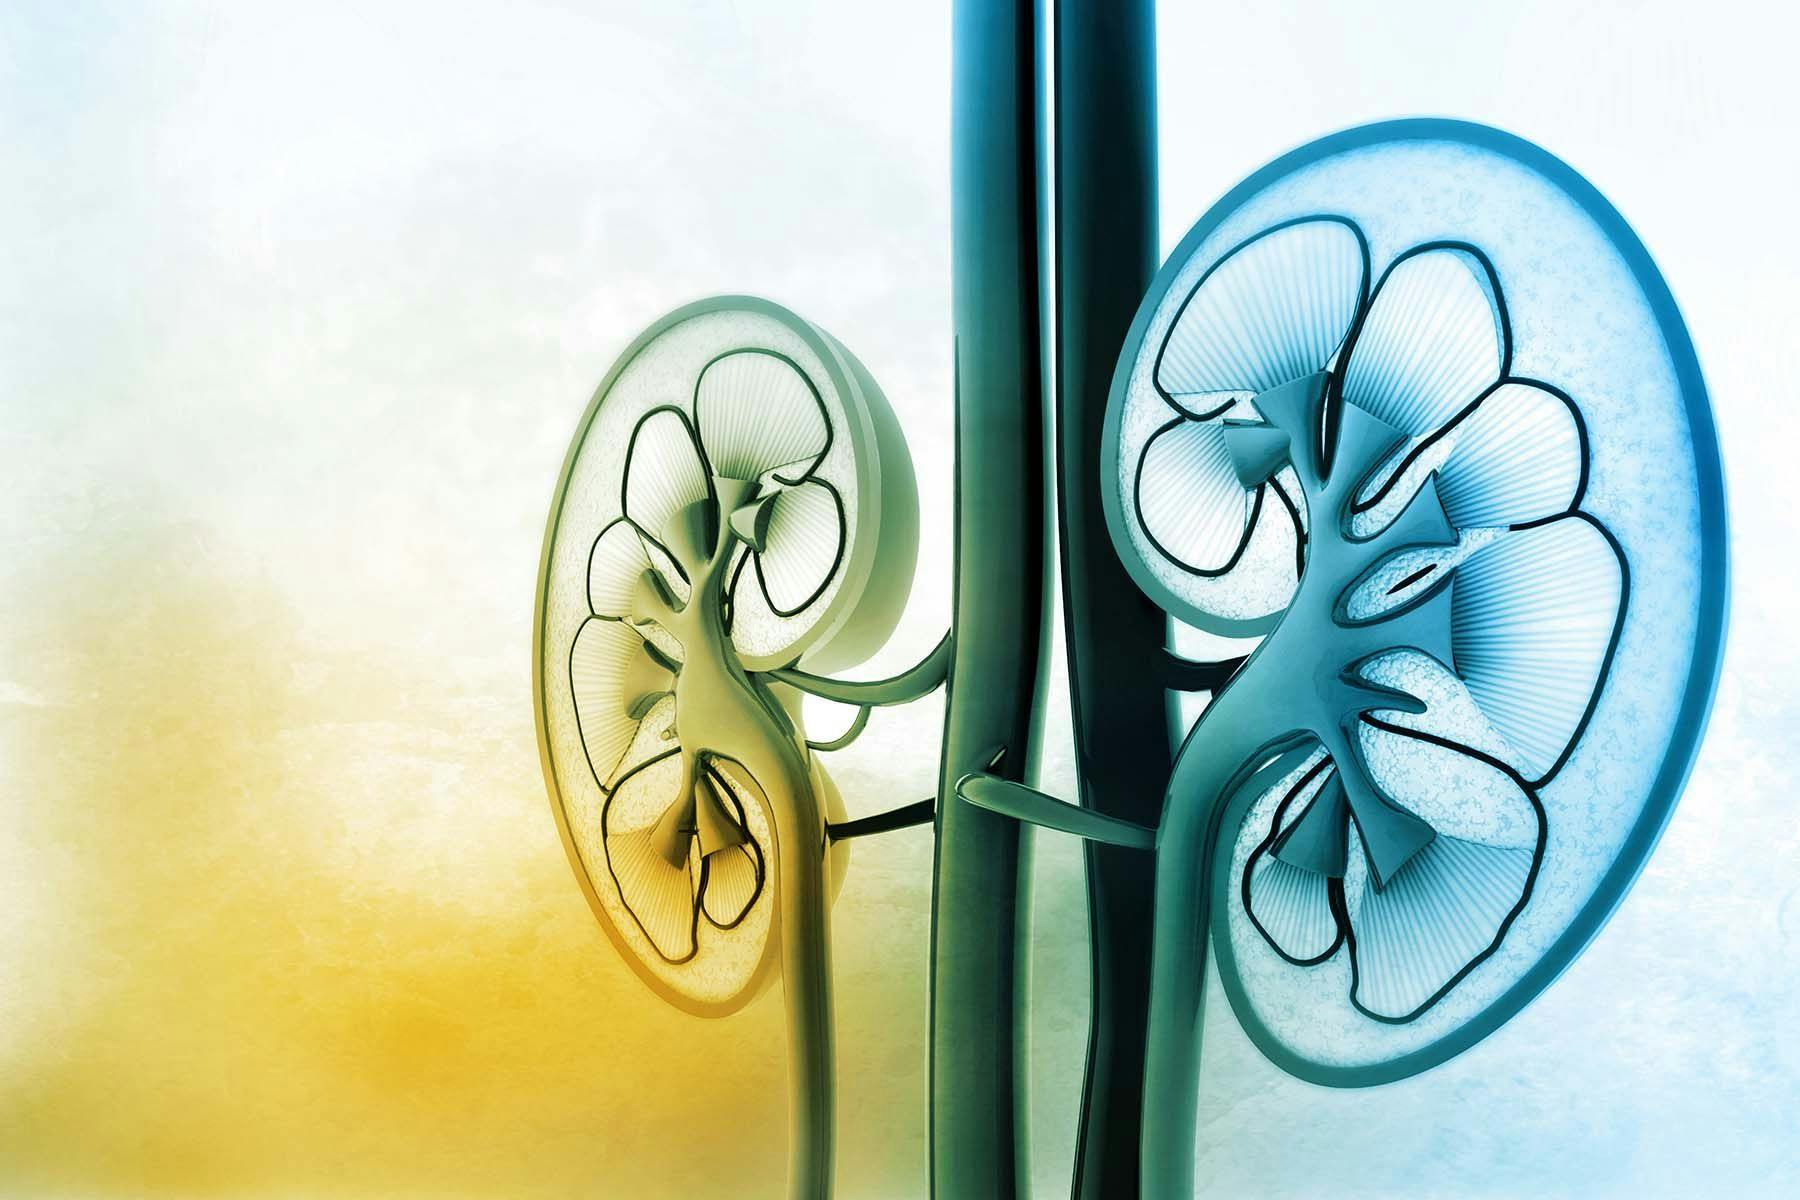 image of kidneys over a watercolor background of yellow and blue